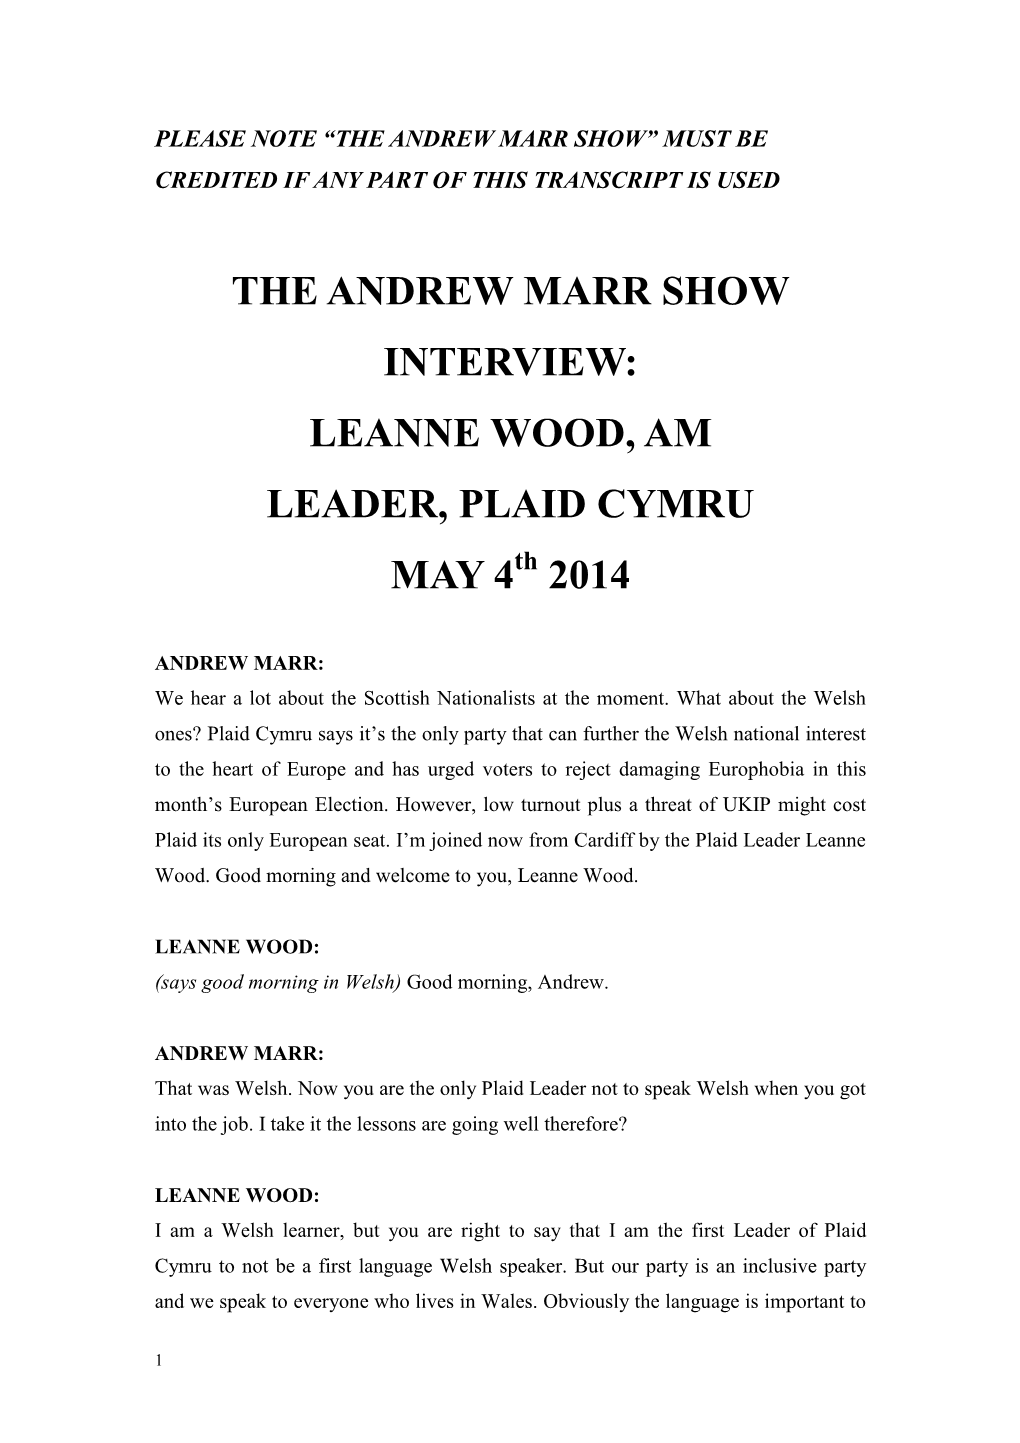 THE ANDREW MARR SHOW INTERVIEW: LEANNE WOOD, AM LEADER, PLAID CYMRU MAY 4Th 2014